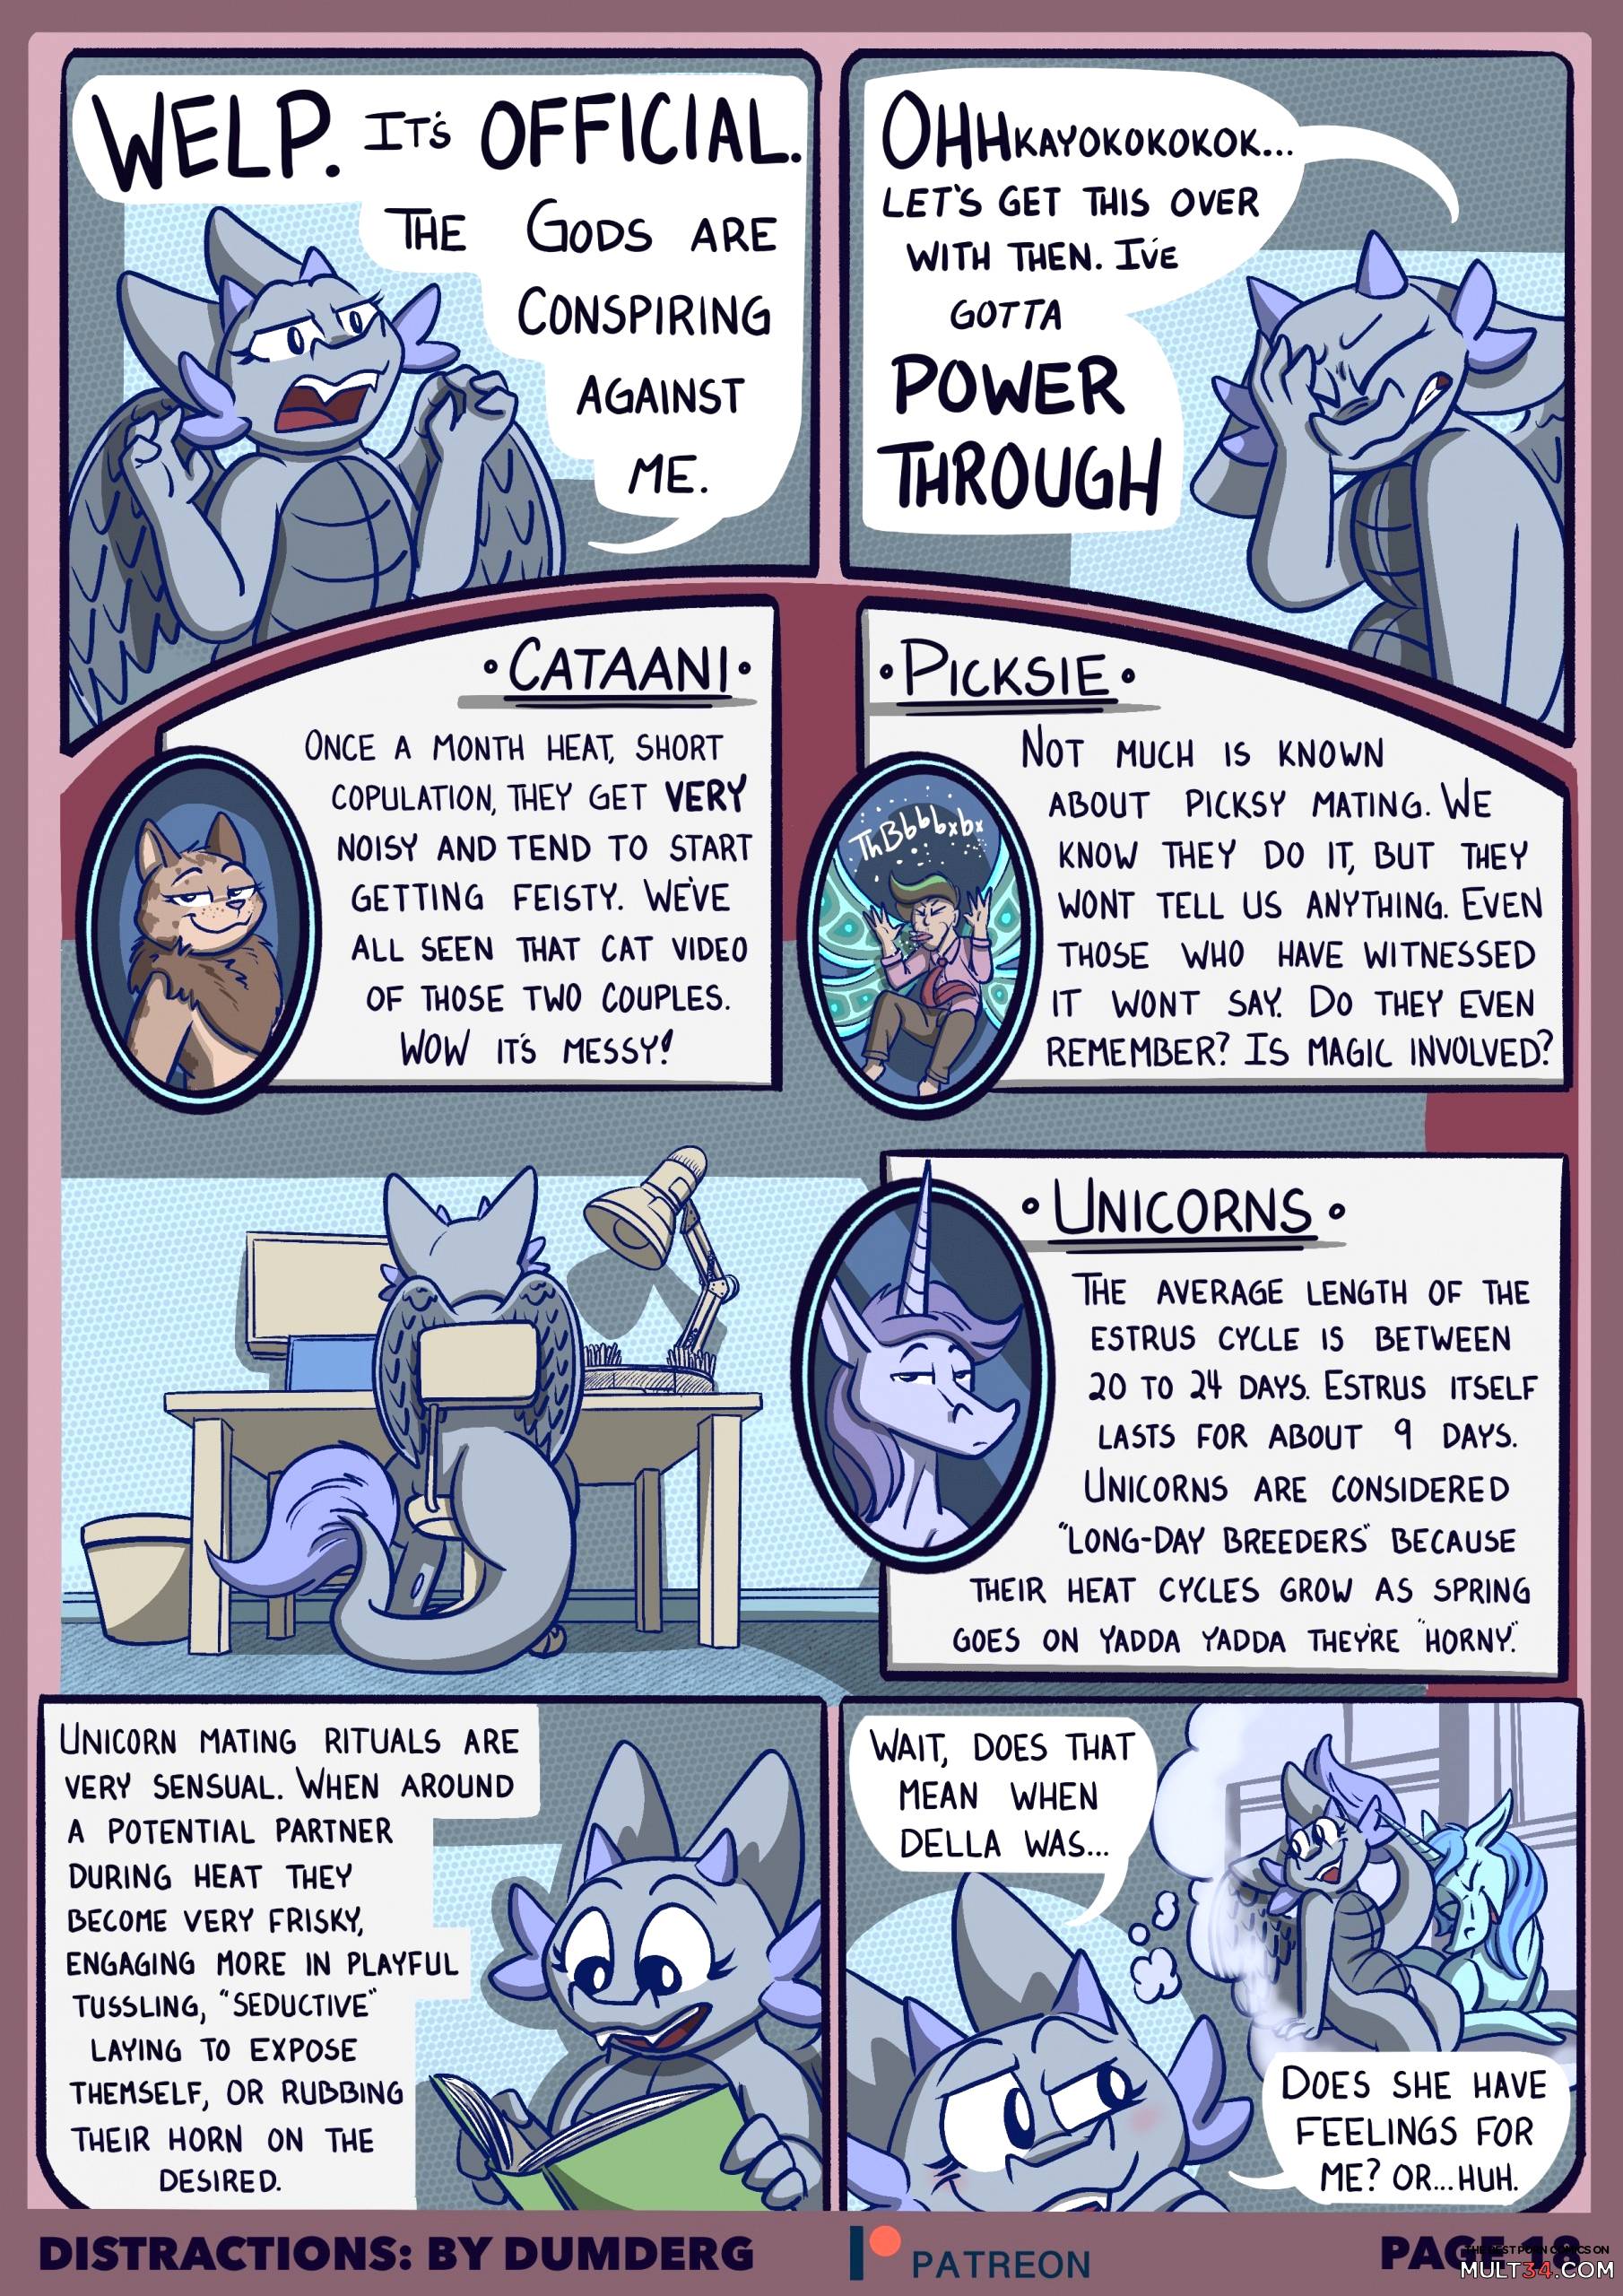 Distractions - DumDerg page 19